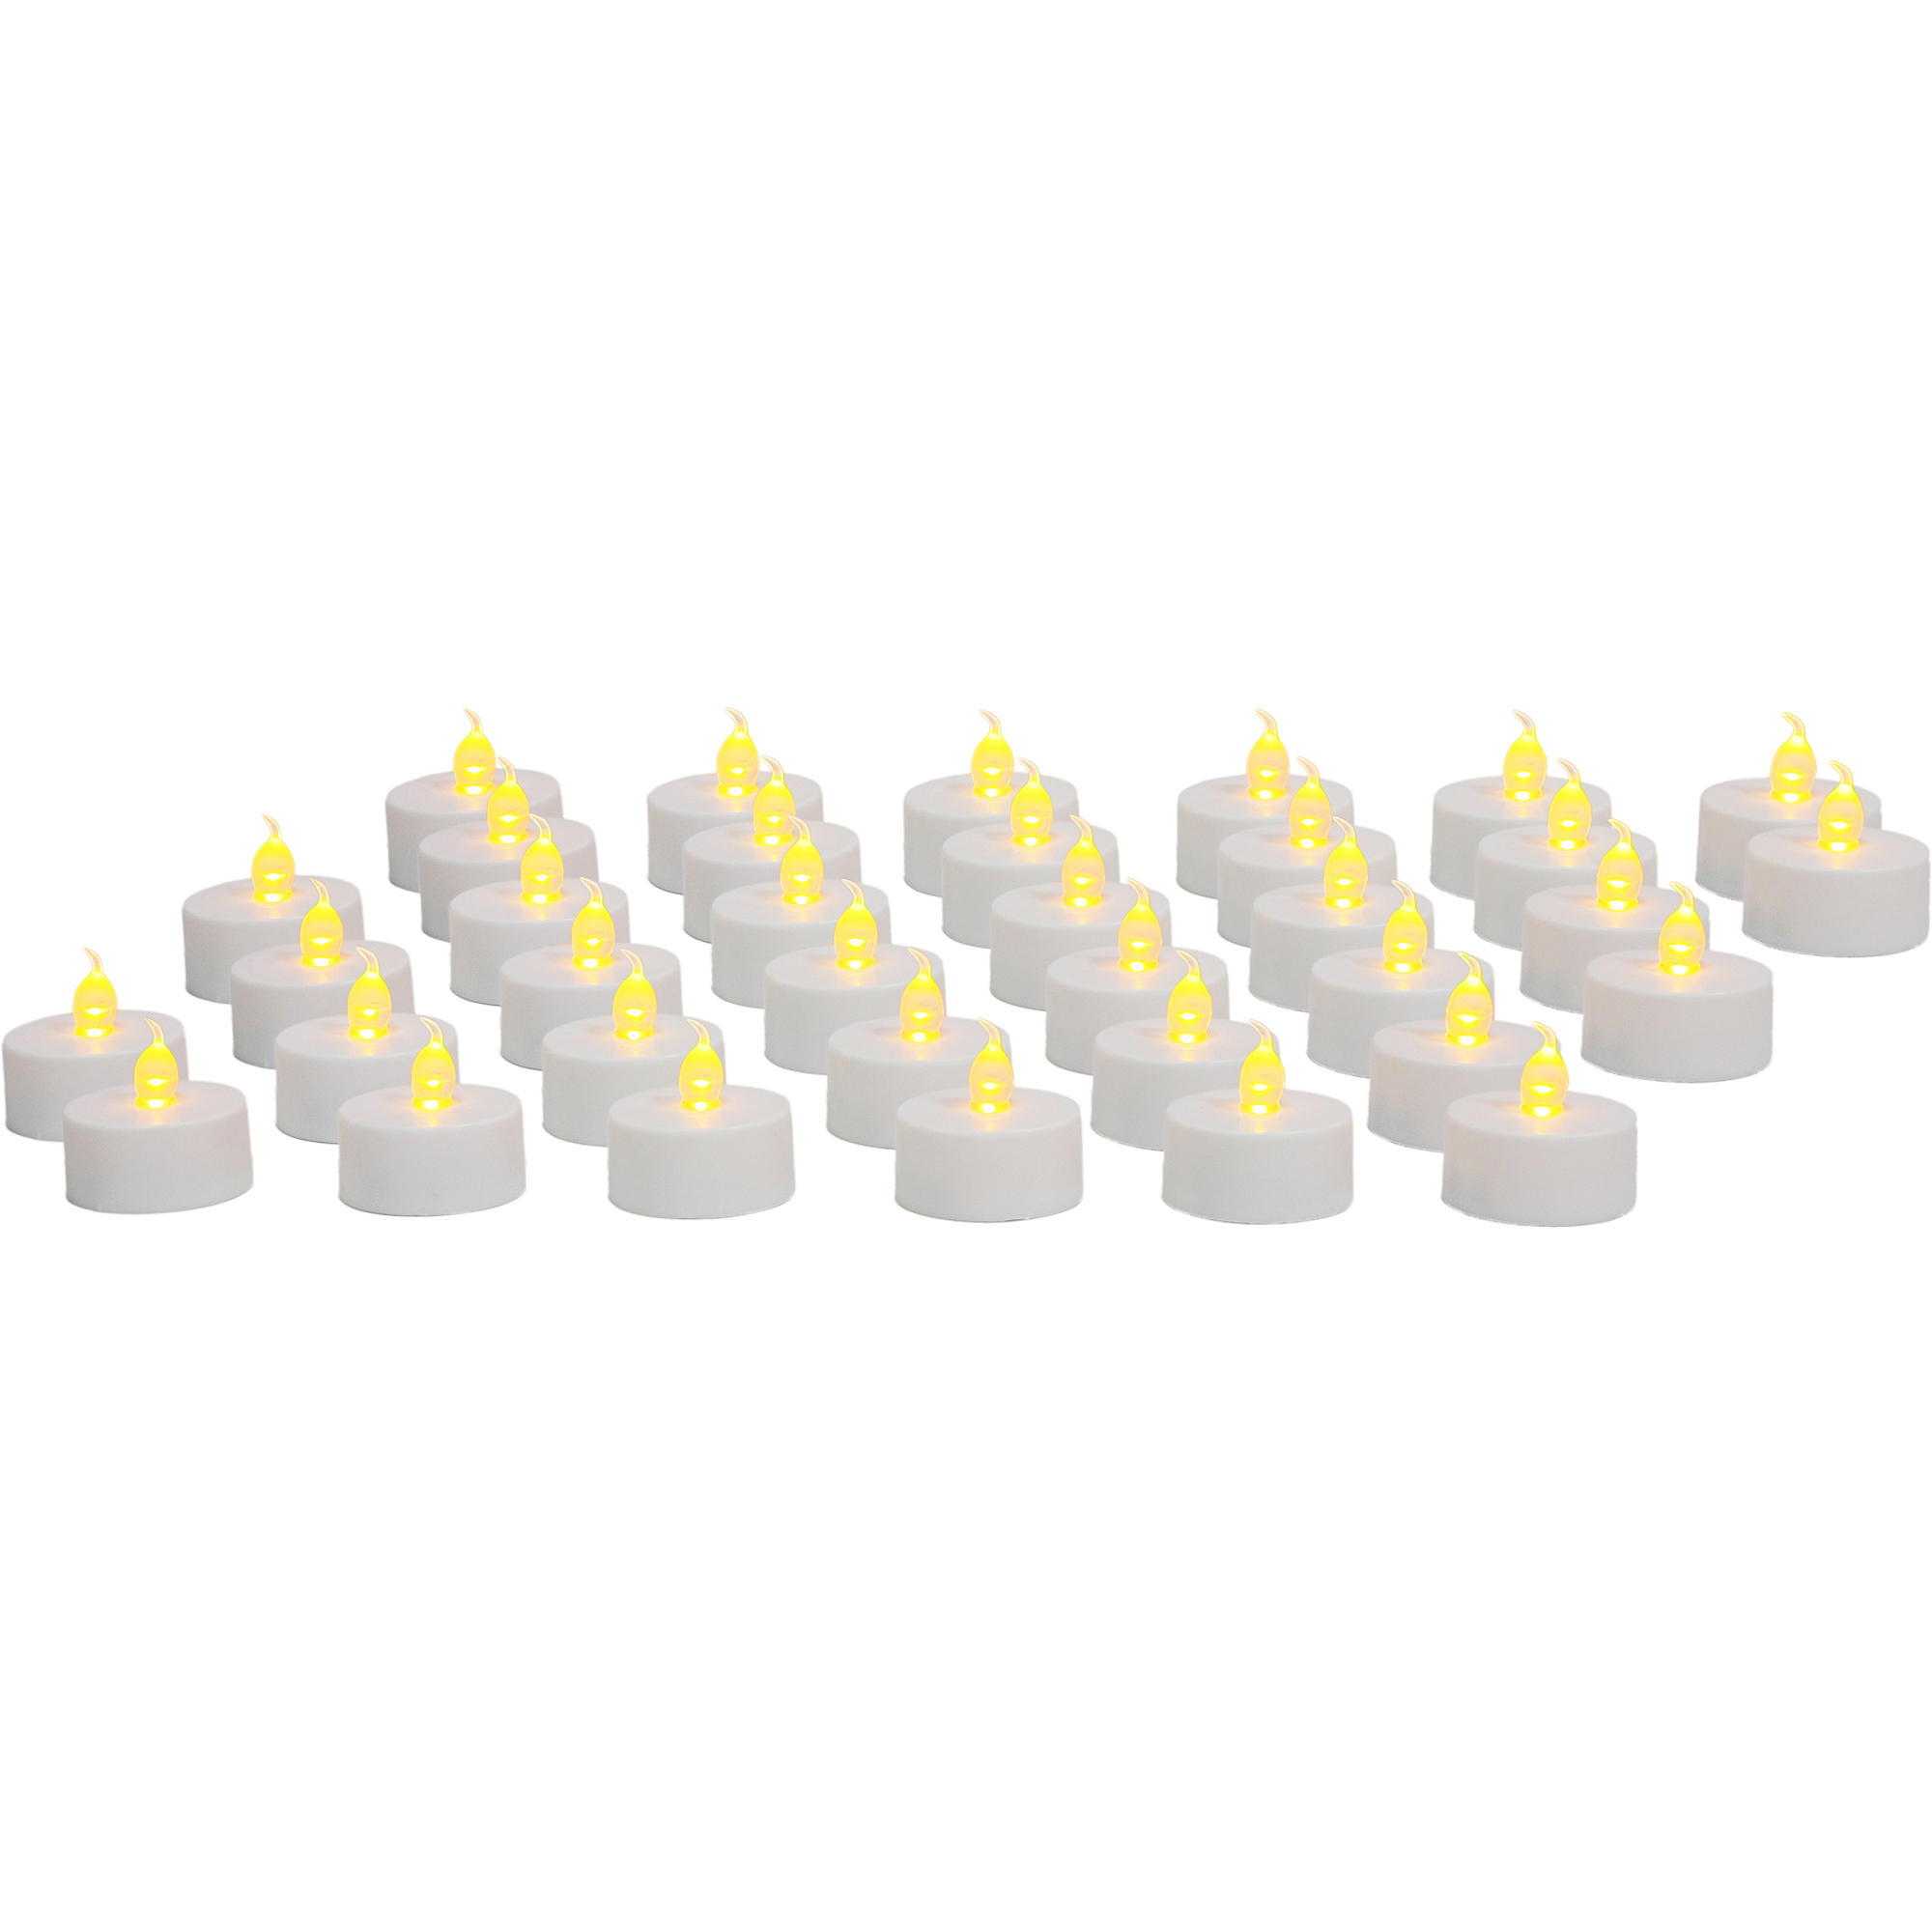 Mainstays Flameless LED Tea Lights, 36 Count - image 1 of 4